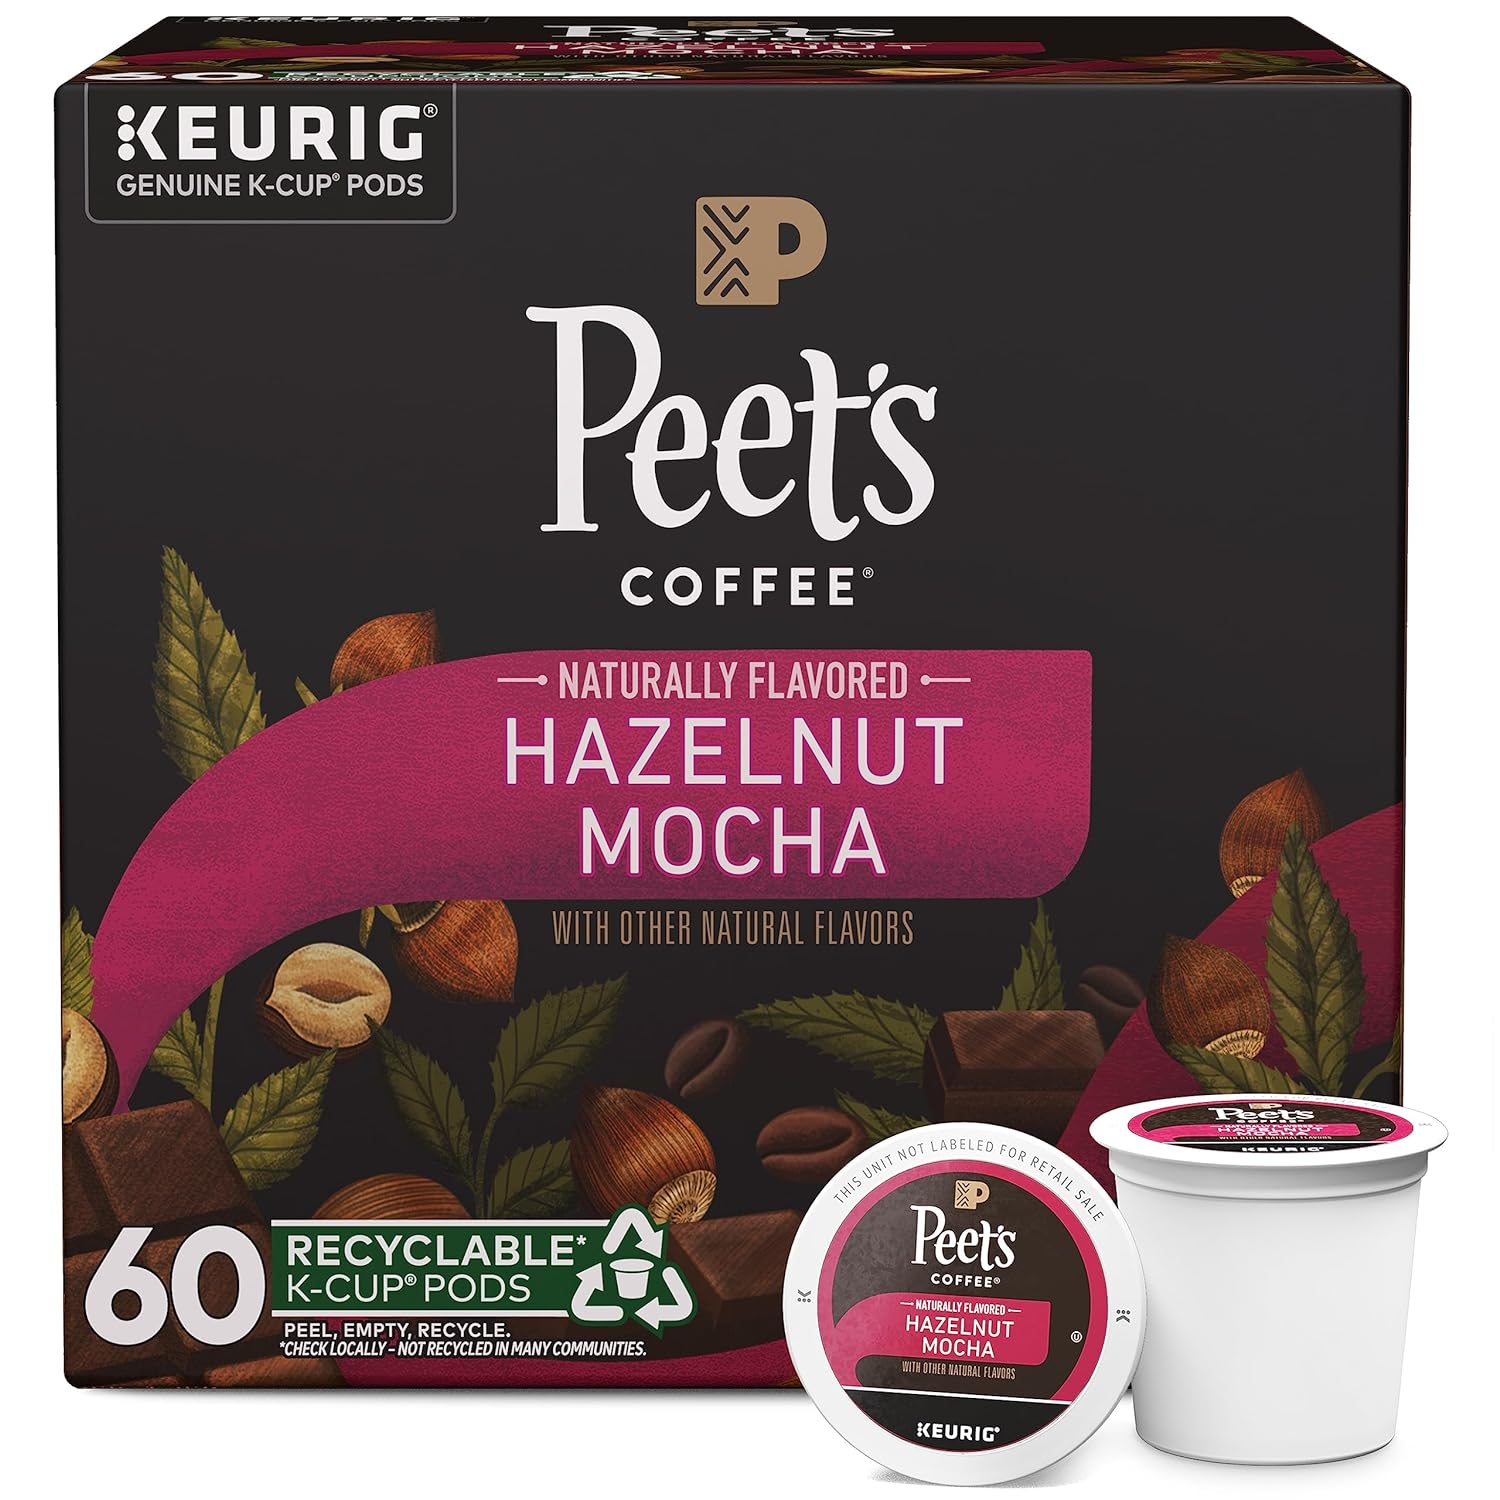 Peet's Coffee, Hazelnut Mocha - Flavored Coffee - 60 K-Cup Pods for Keurig Brewers (6 boxes of 10 pods), Light Roast